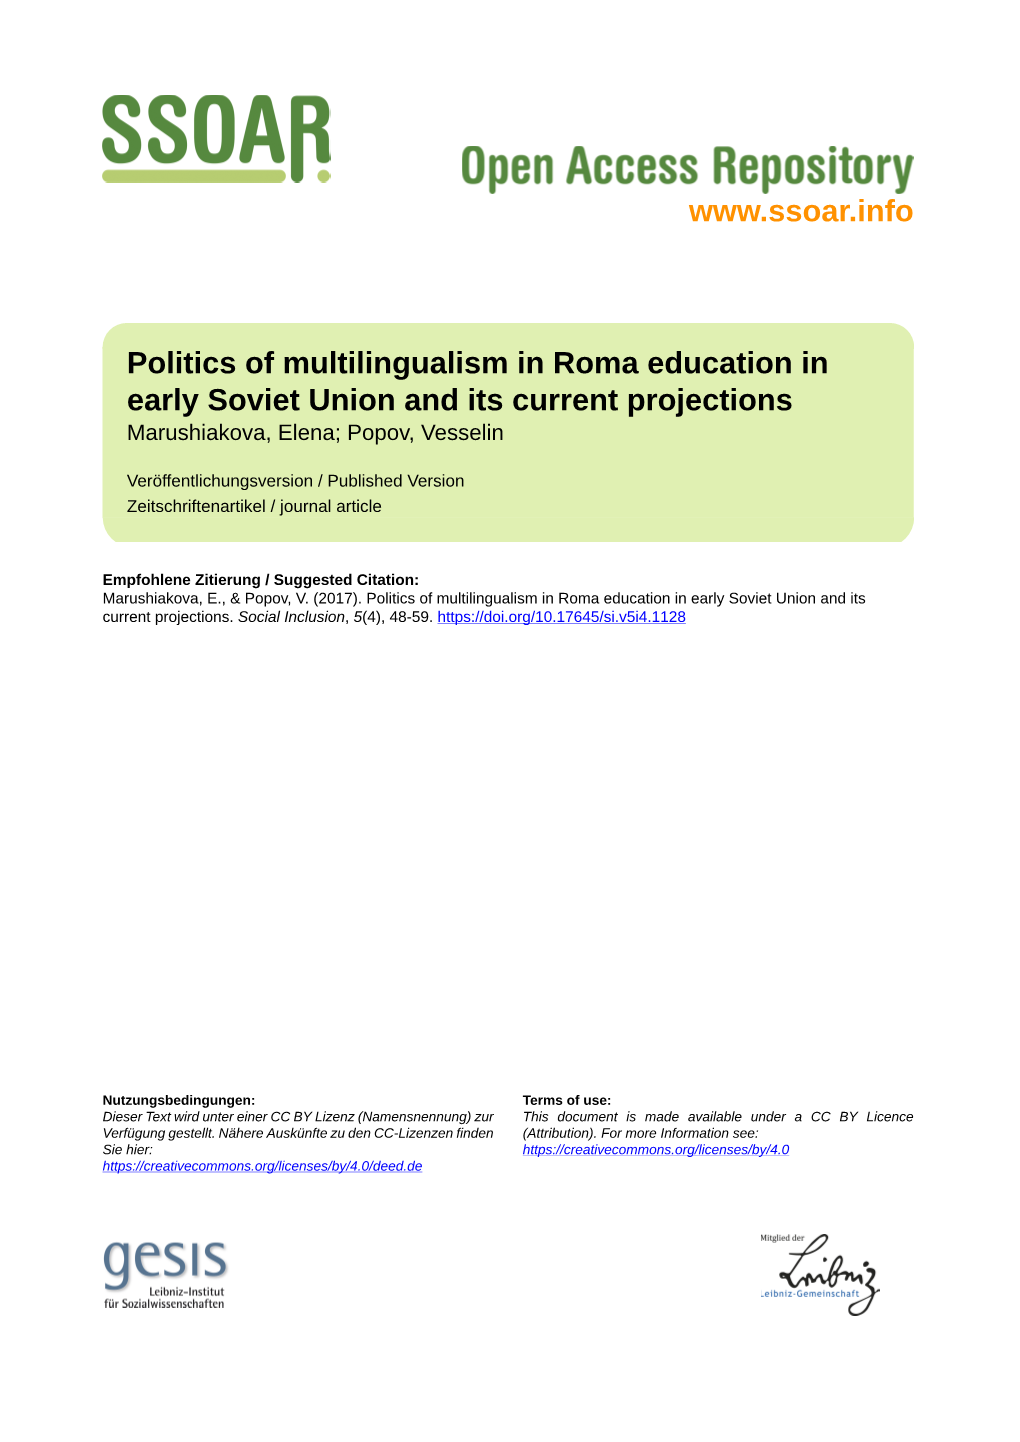 Politics of Multilingualism in Roma Education in Early Soviet Union and Its Current Projections Marushiakova, Elena; Popov, Vesselin